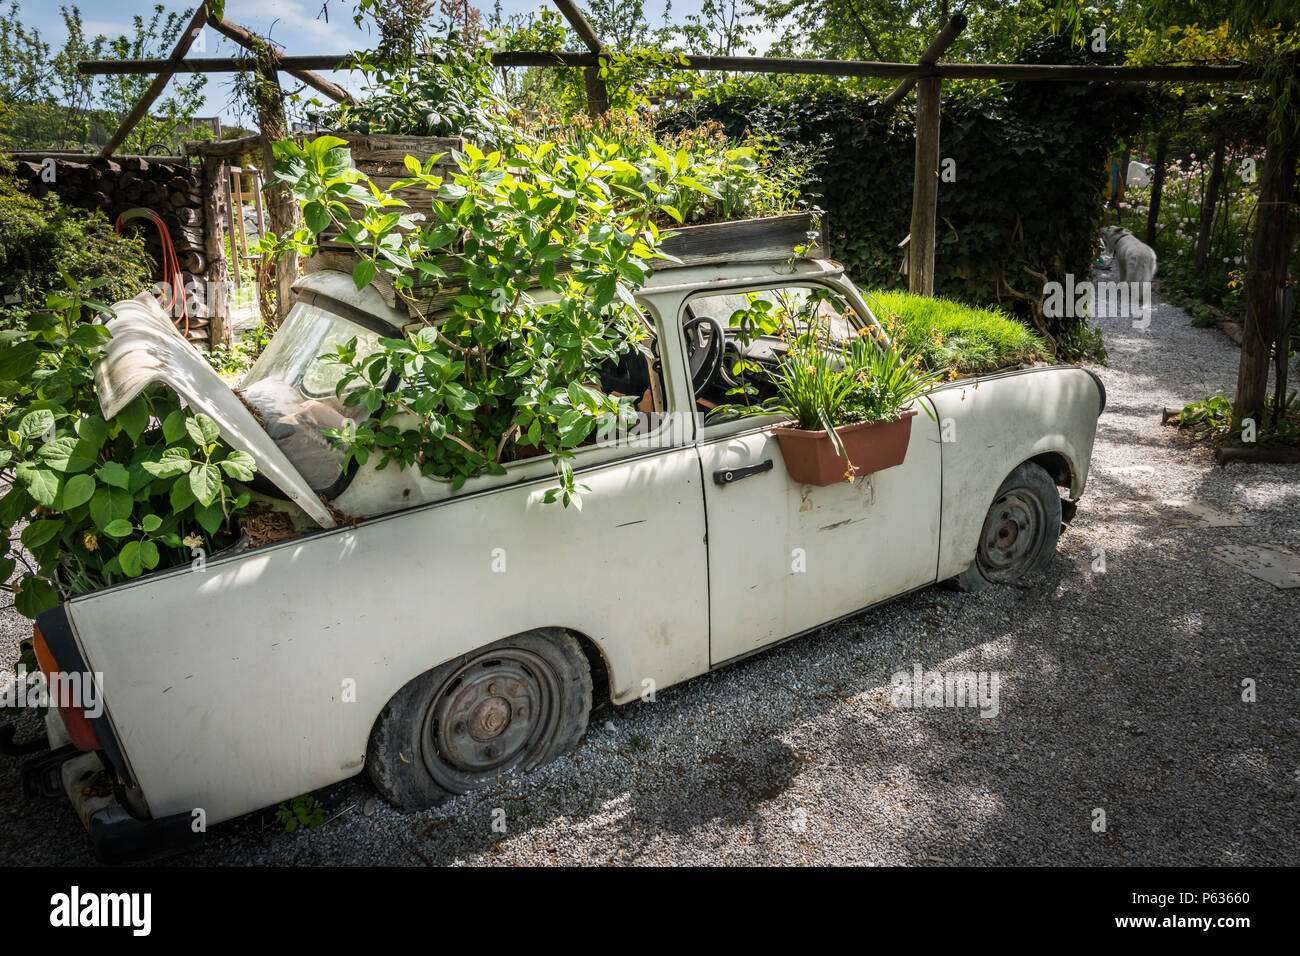 Old Car Used As Decoration And Flower Pot In A Garden Stock Photo